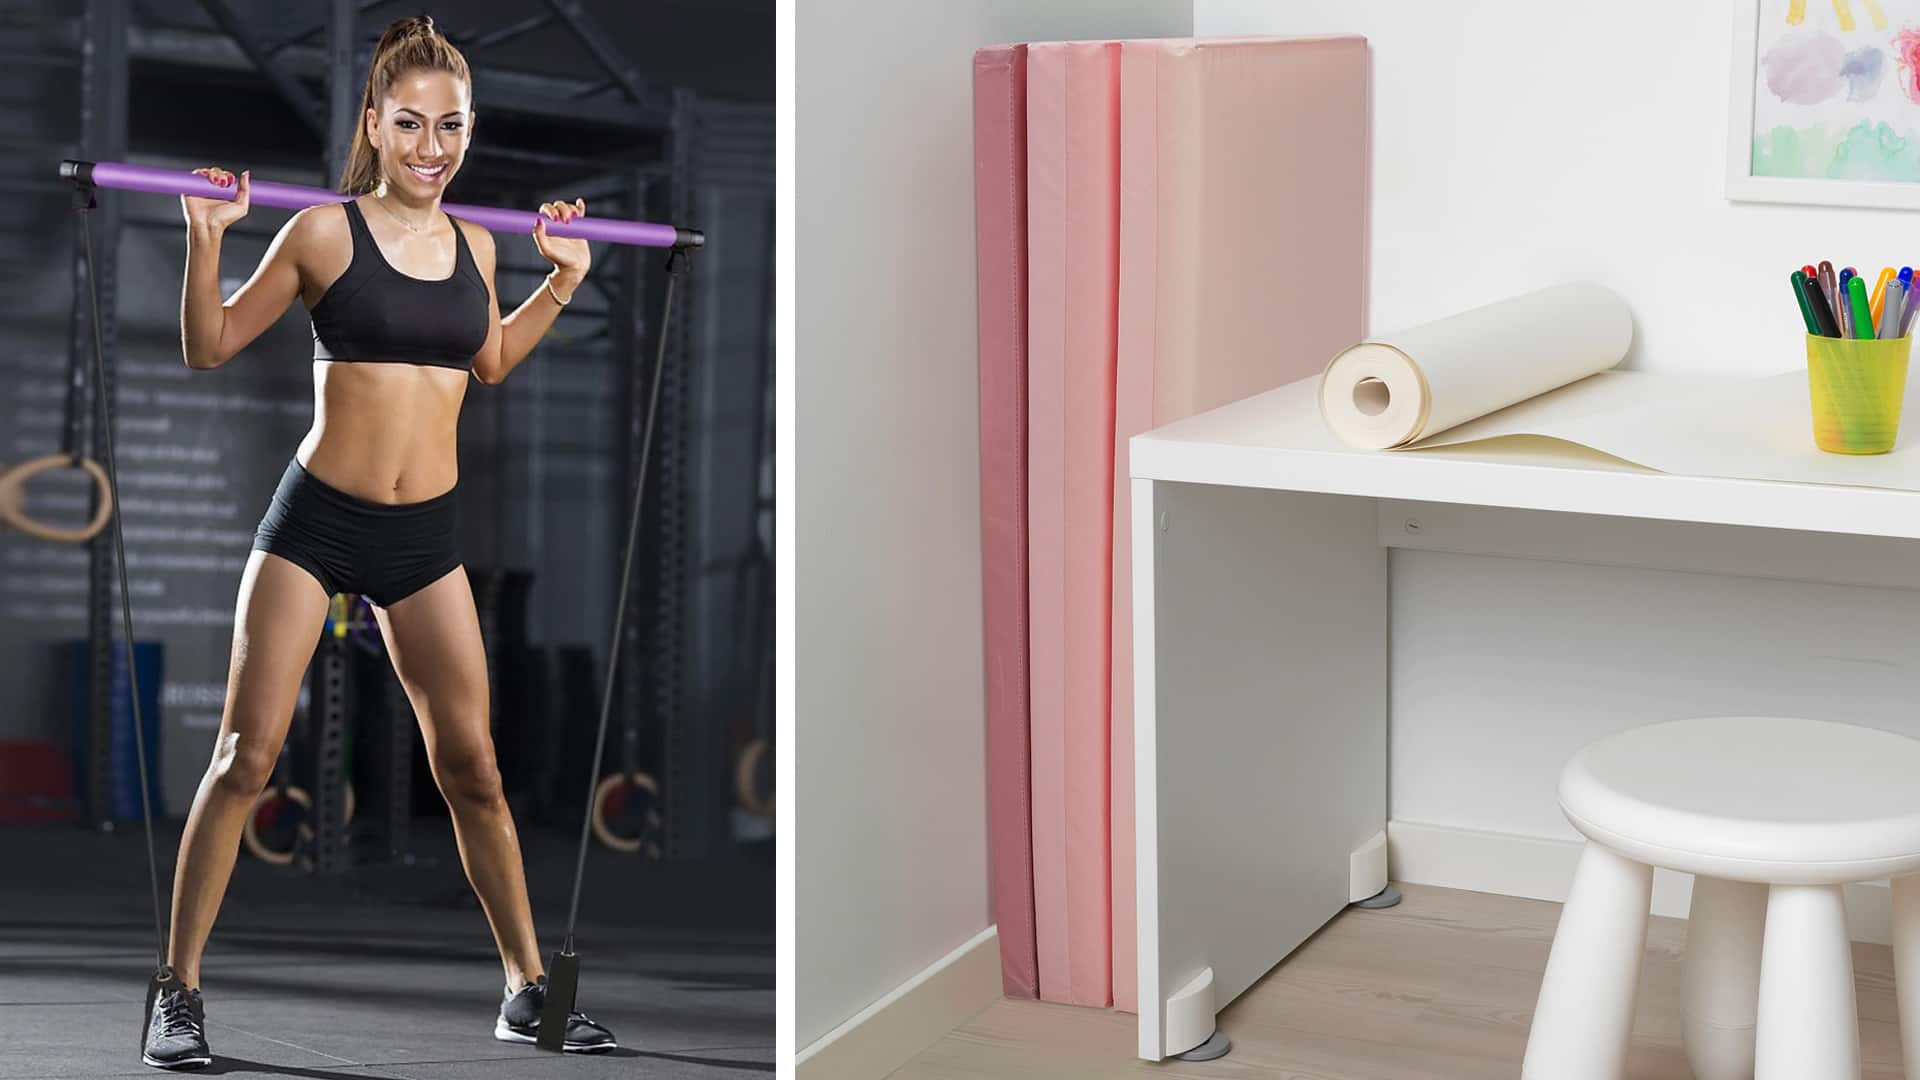  Fitness Equipment For Small Space